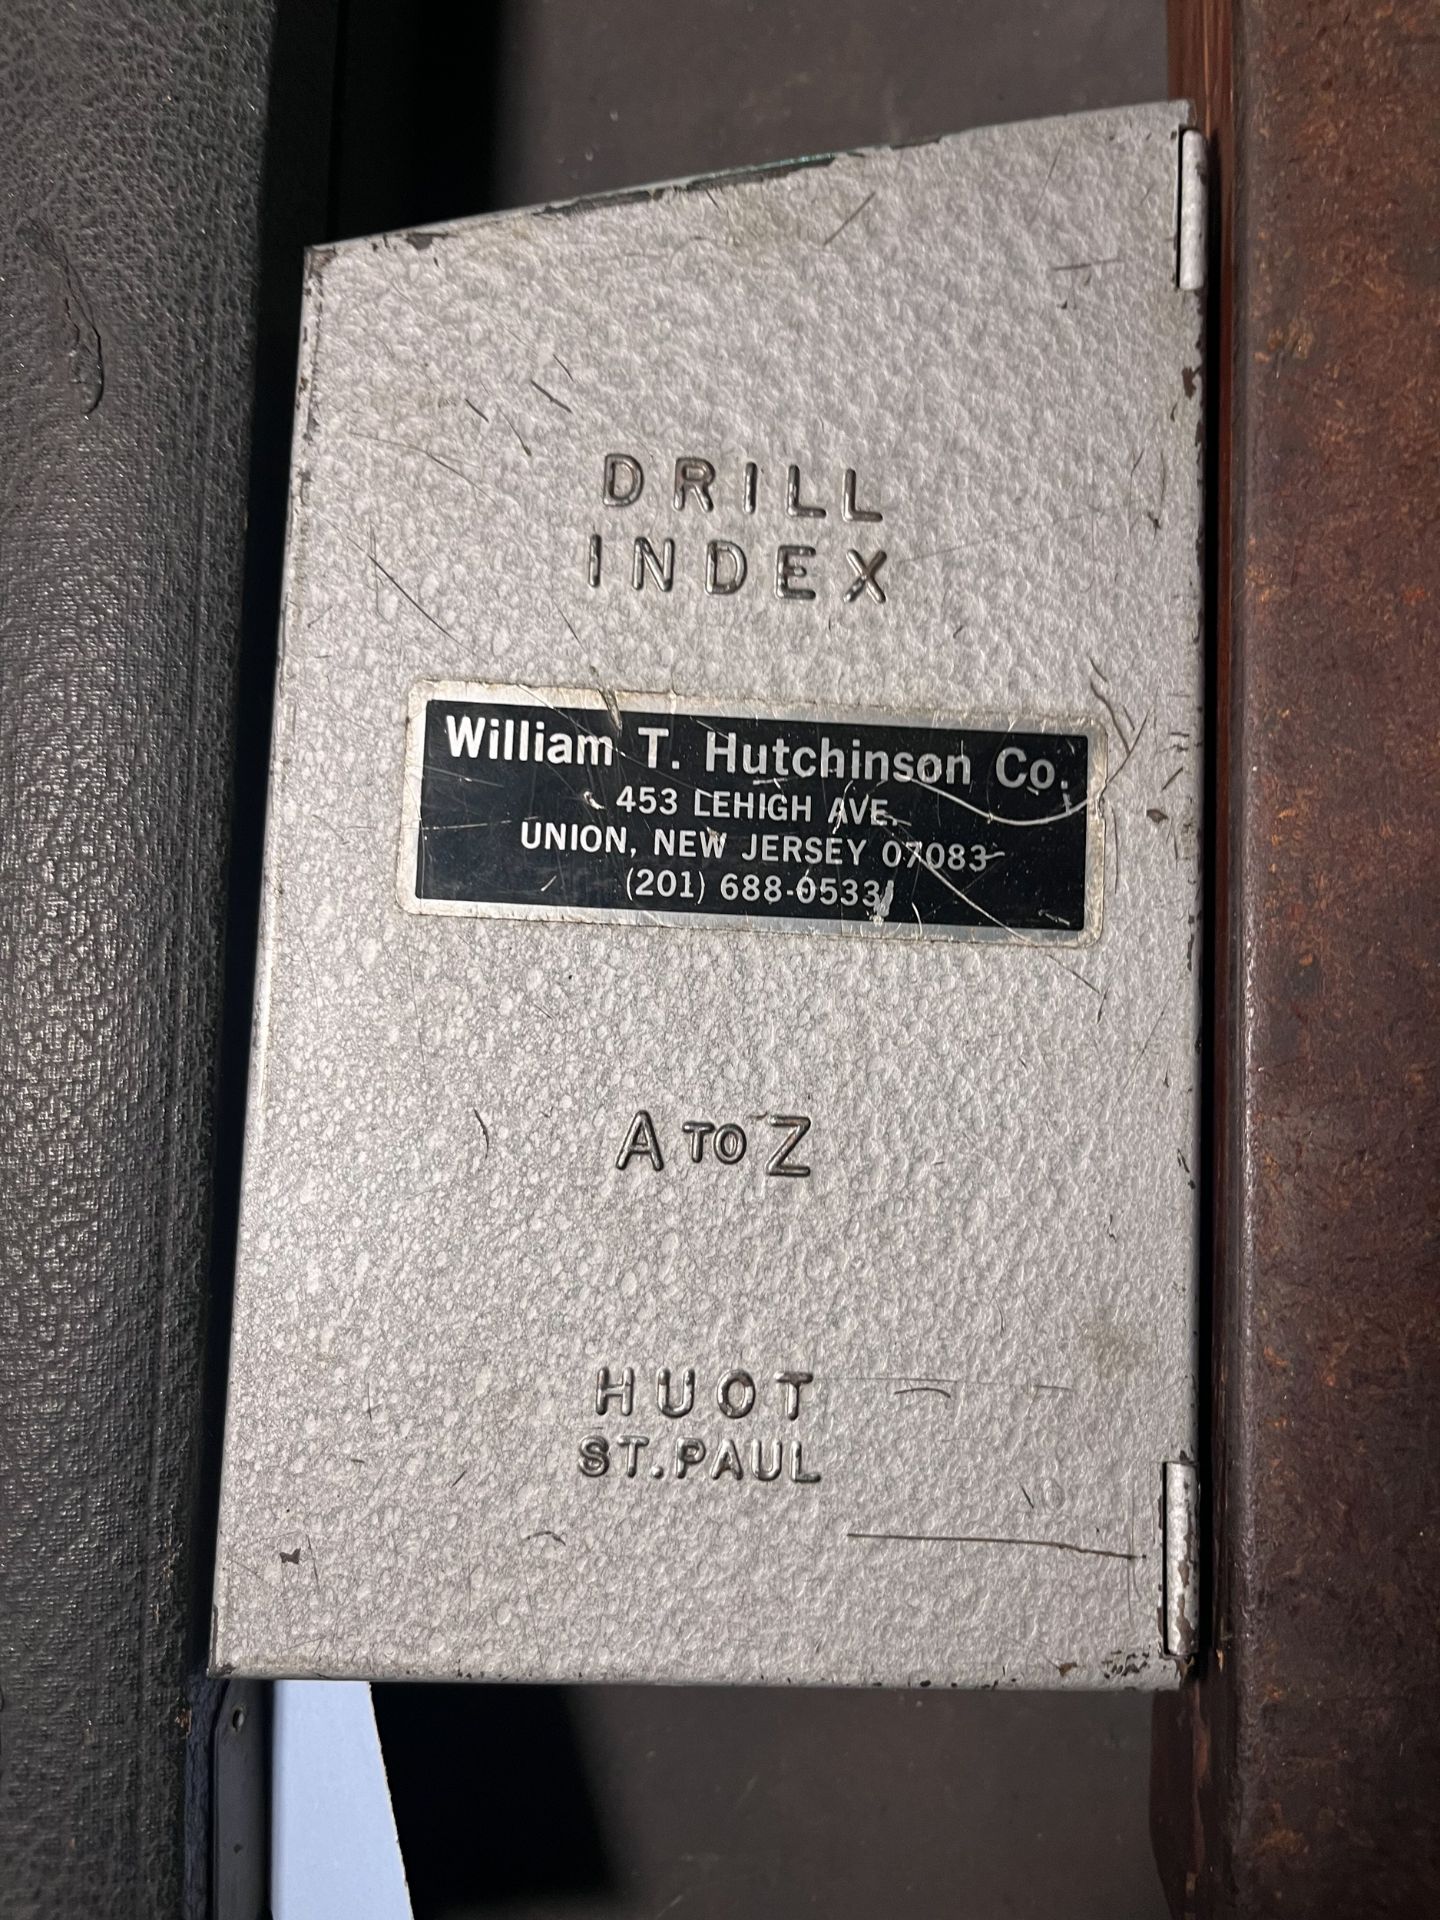 Incomplete Hutchinson Drill Index - Image 2 of 2